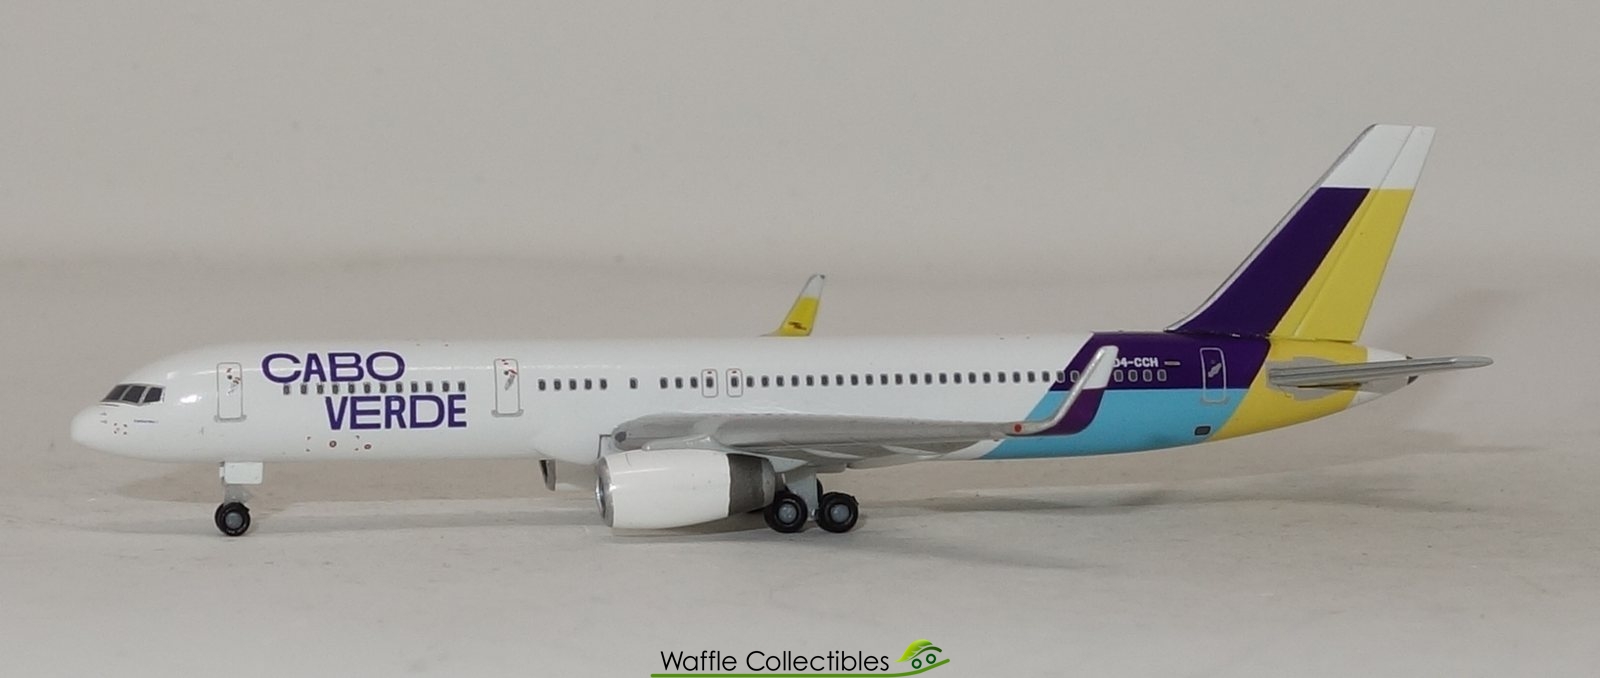 Herpa Wings 1:500 boeing 757-200 cabo verde d4-cch 534604 modellairport 500 